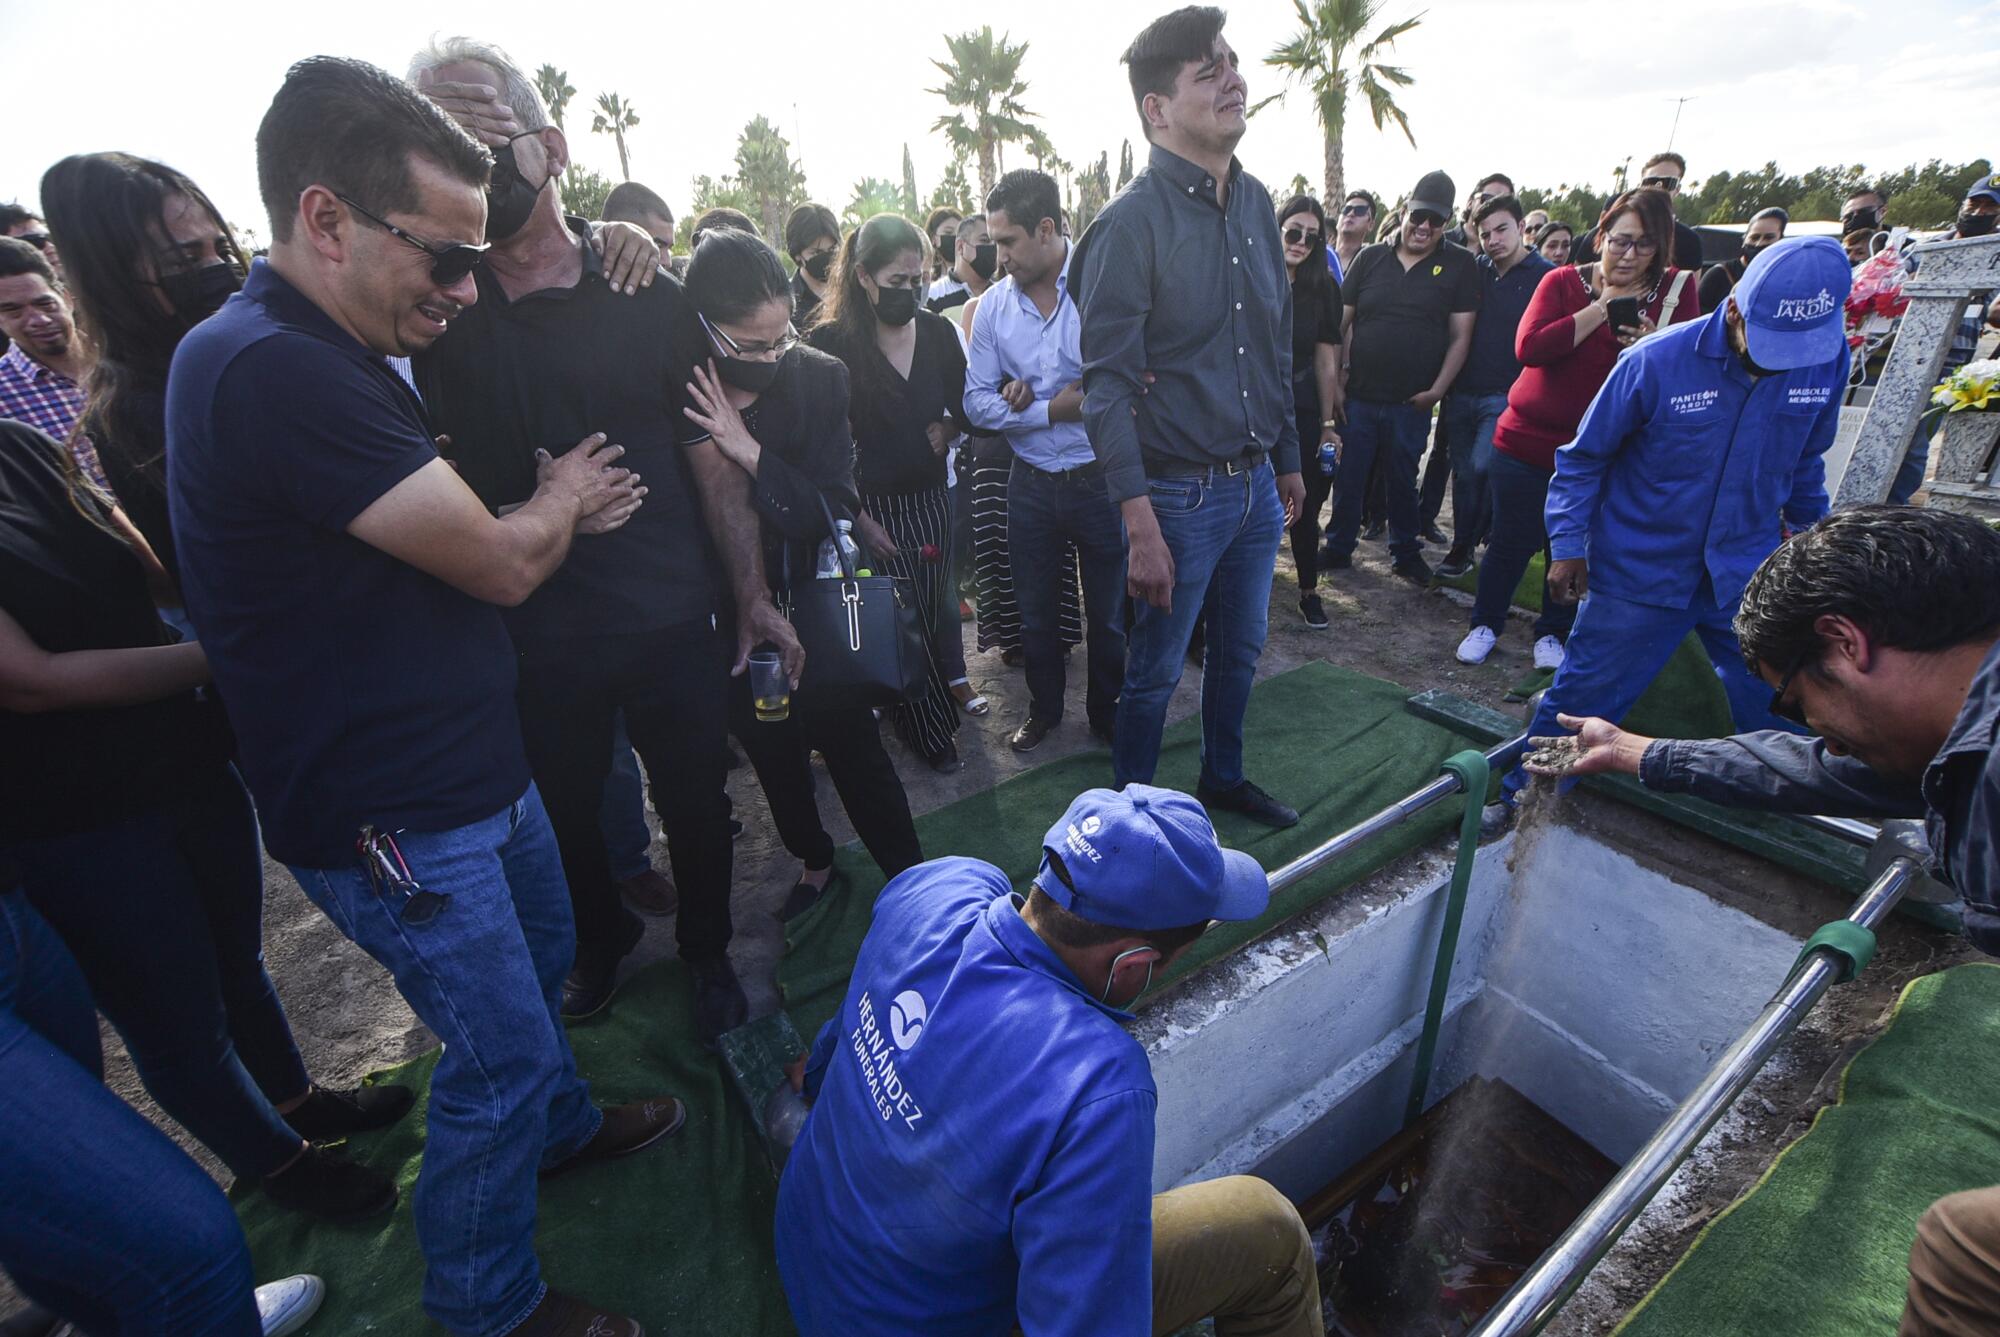 Mortuary workers lower a coffin into a grave as mourners look on 